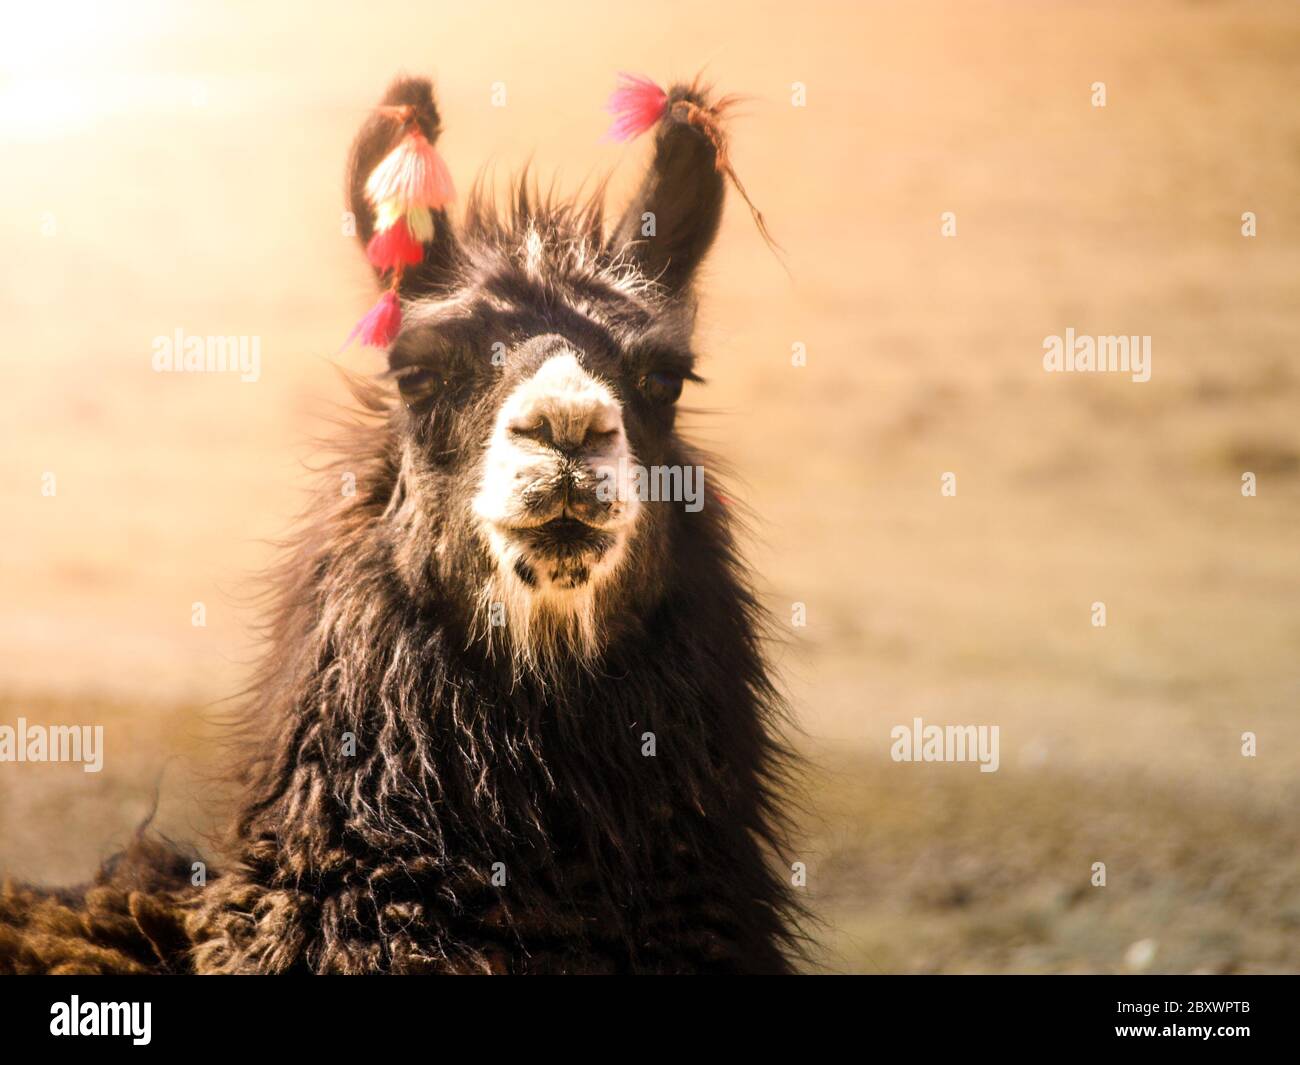 Close-up portrait of brown llama, Andes, South America. Stock Photo